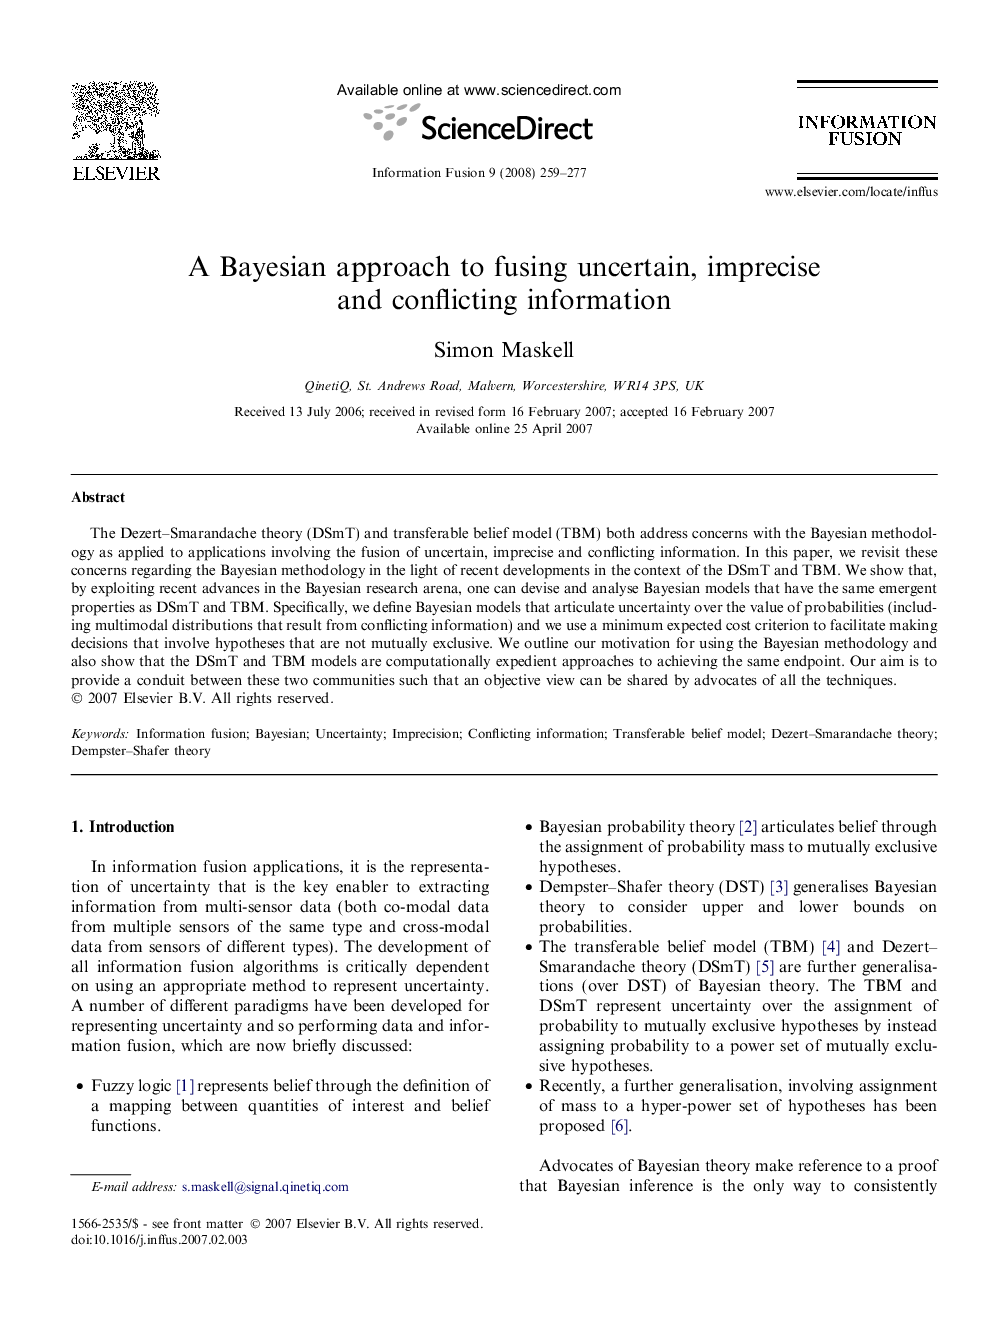 A Bayesian approach to fusing uncertain, imprecise and conflicting information